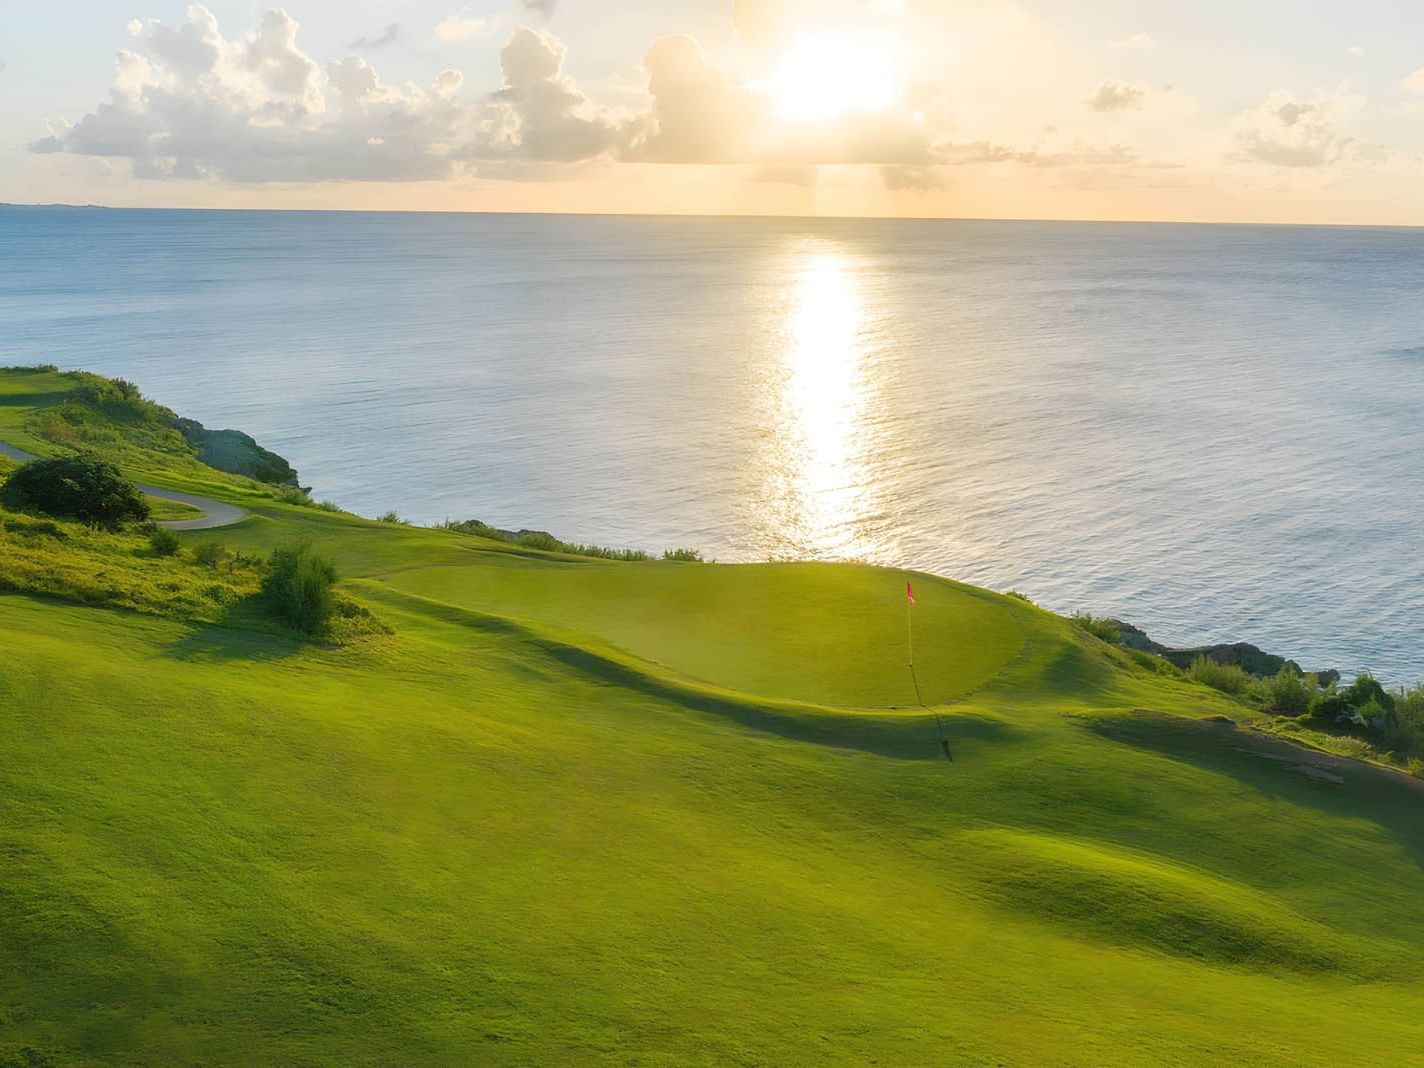 Aerial view of Golf court at sunset, St George's Club Bermuda